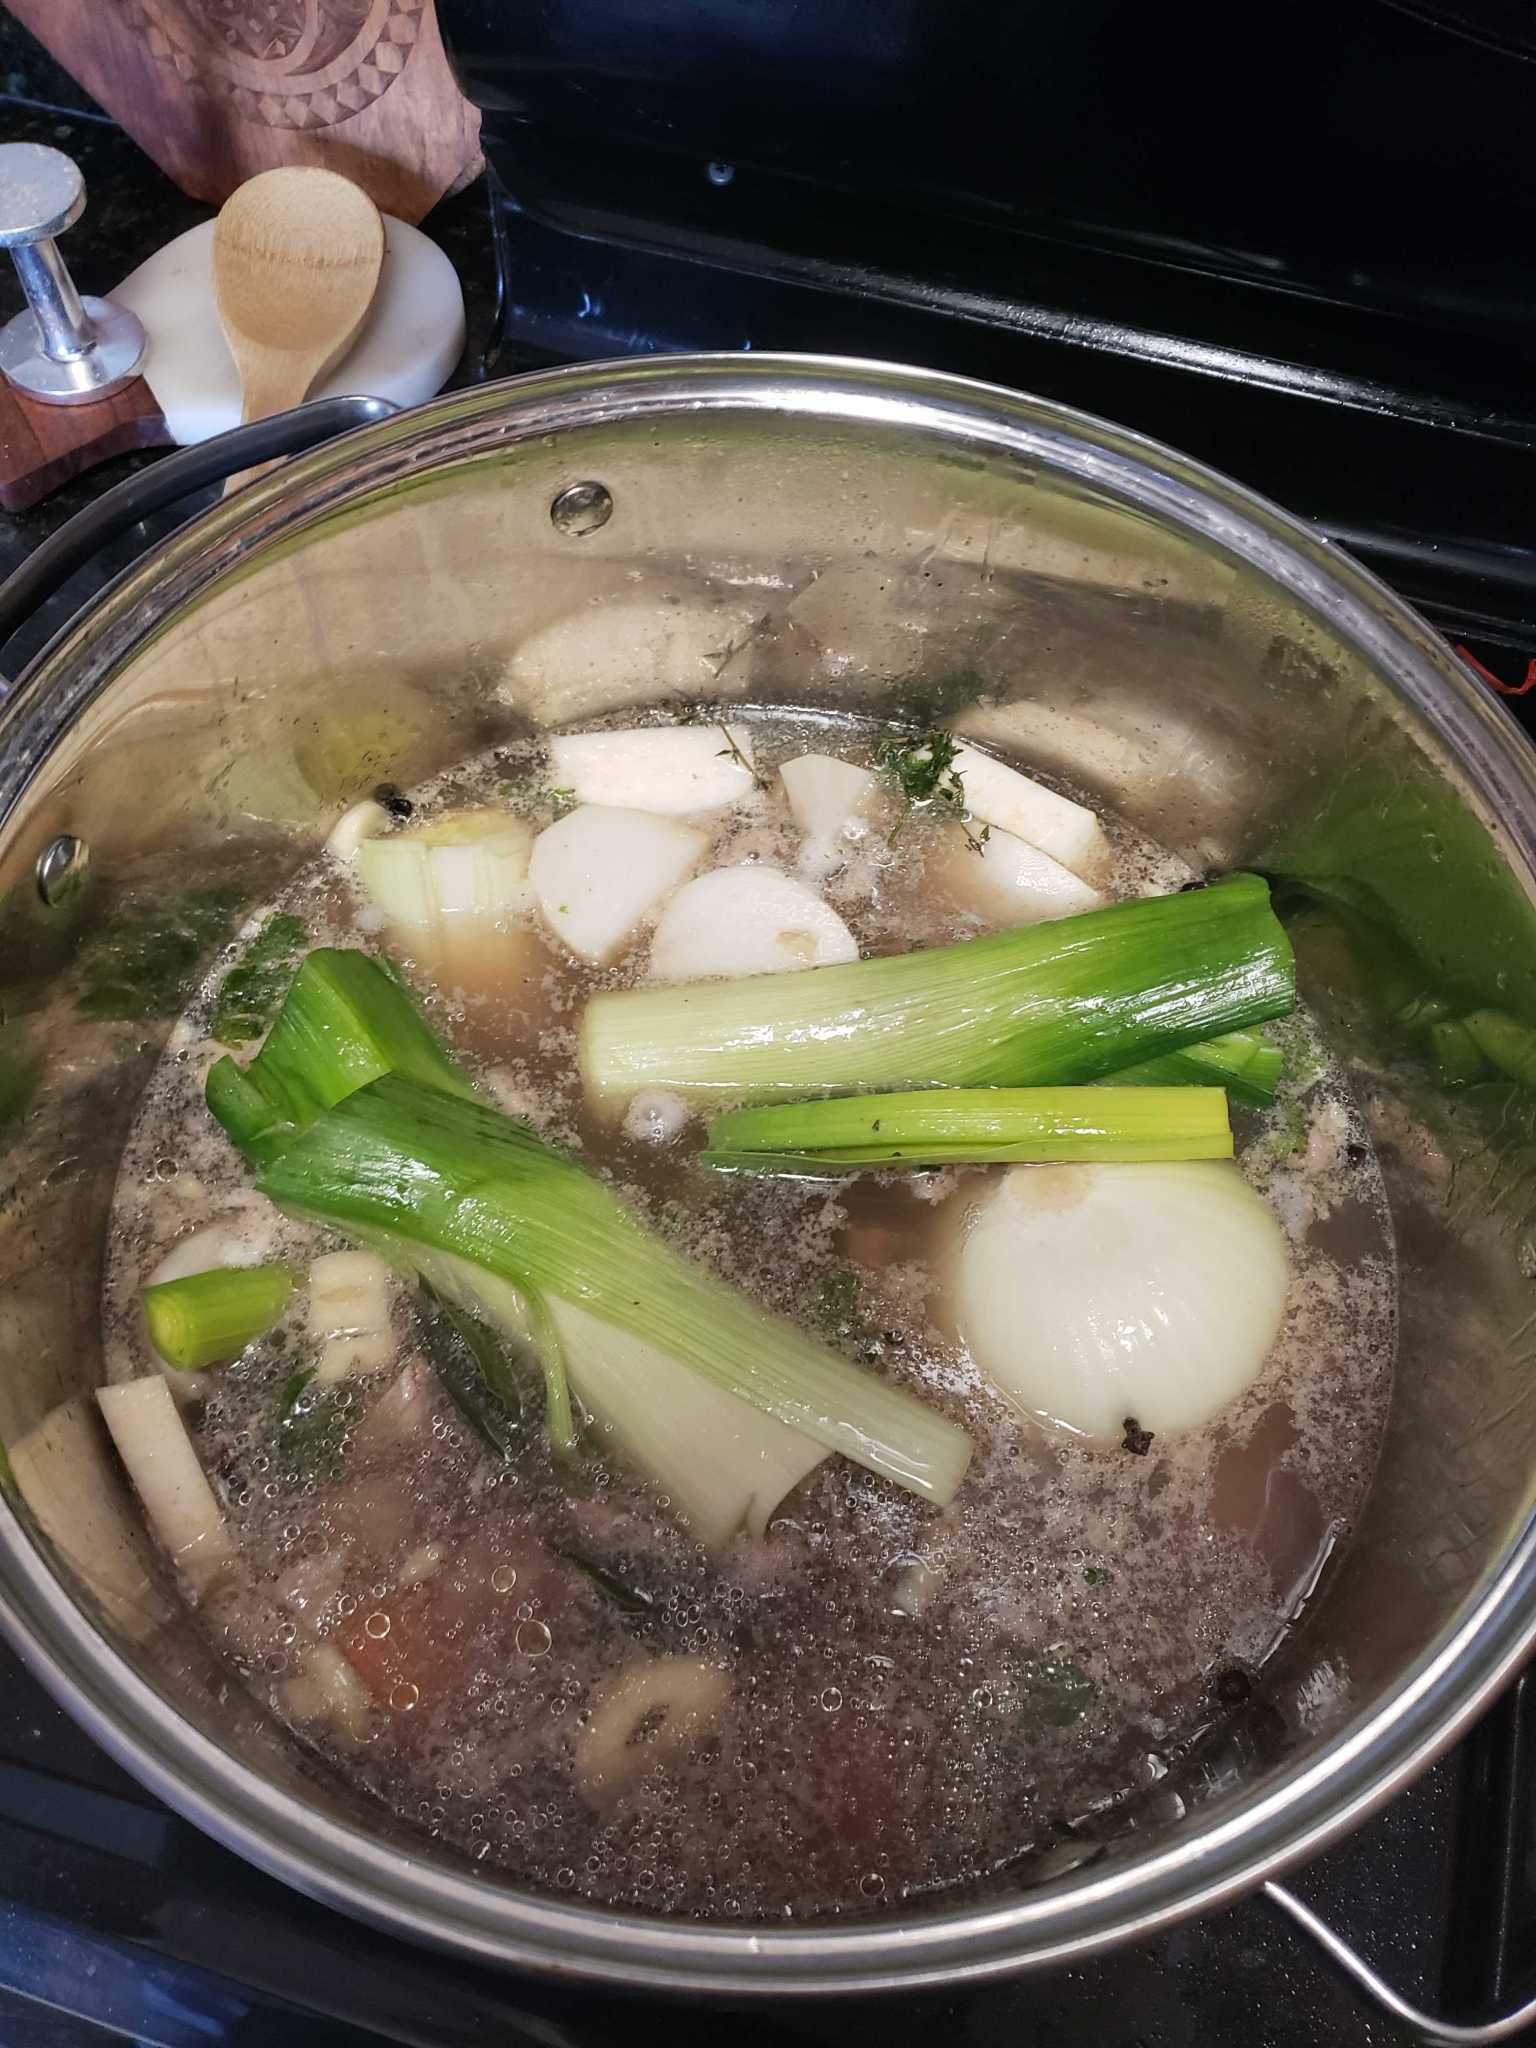 French stew on a pot on a stove, leeks, potatoes, celery root, and onion are visible in broth